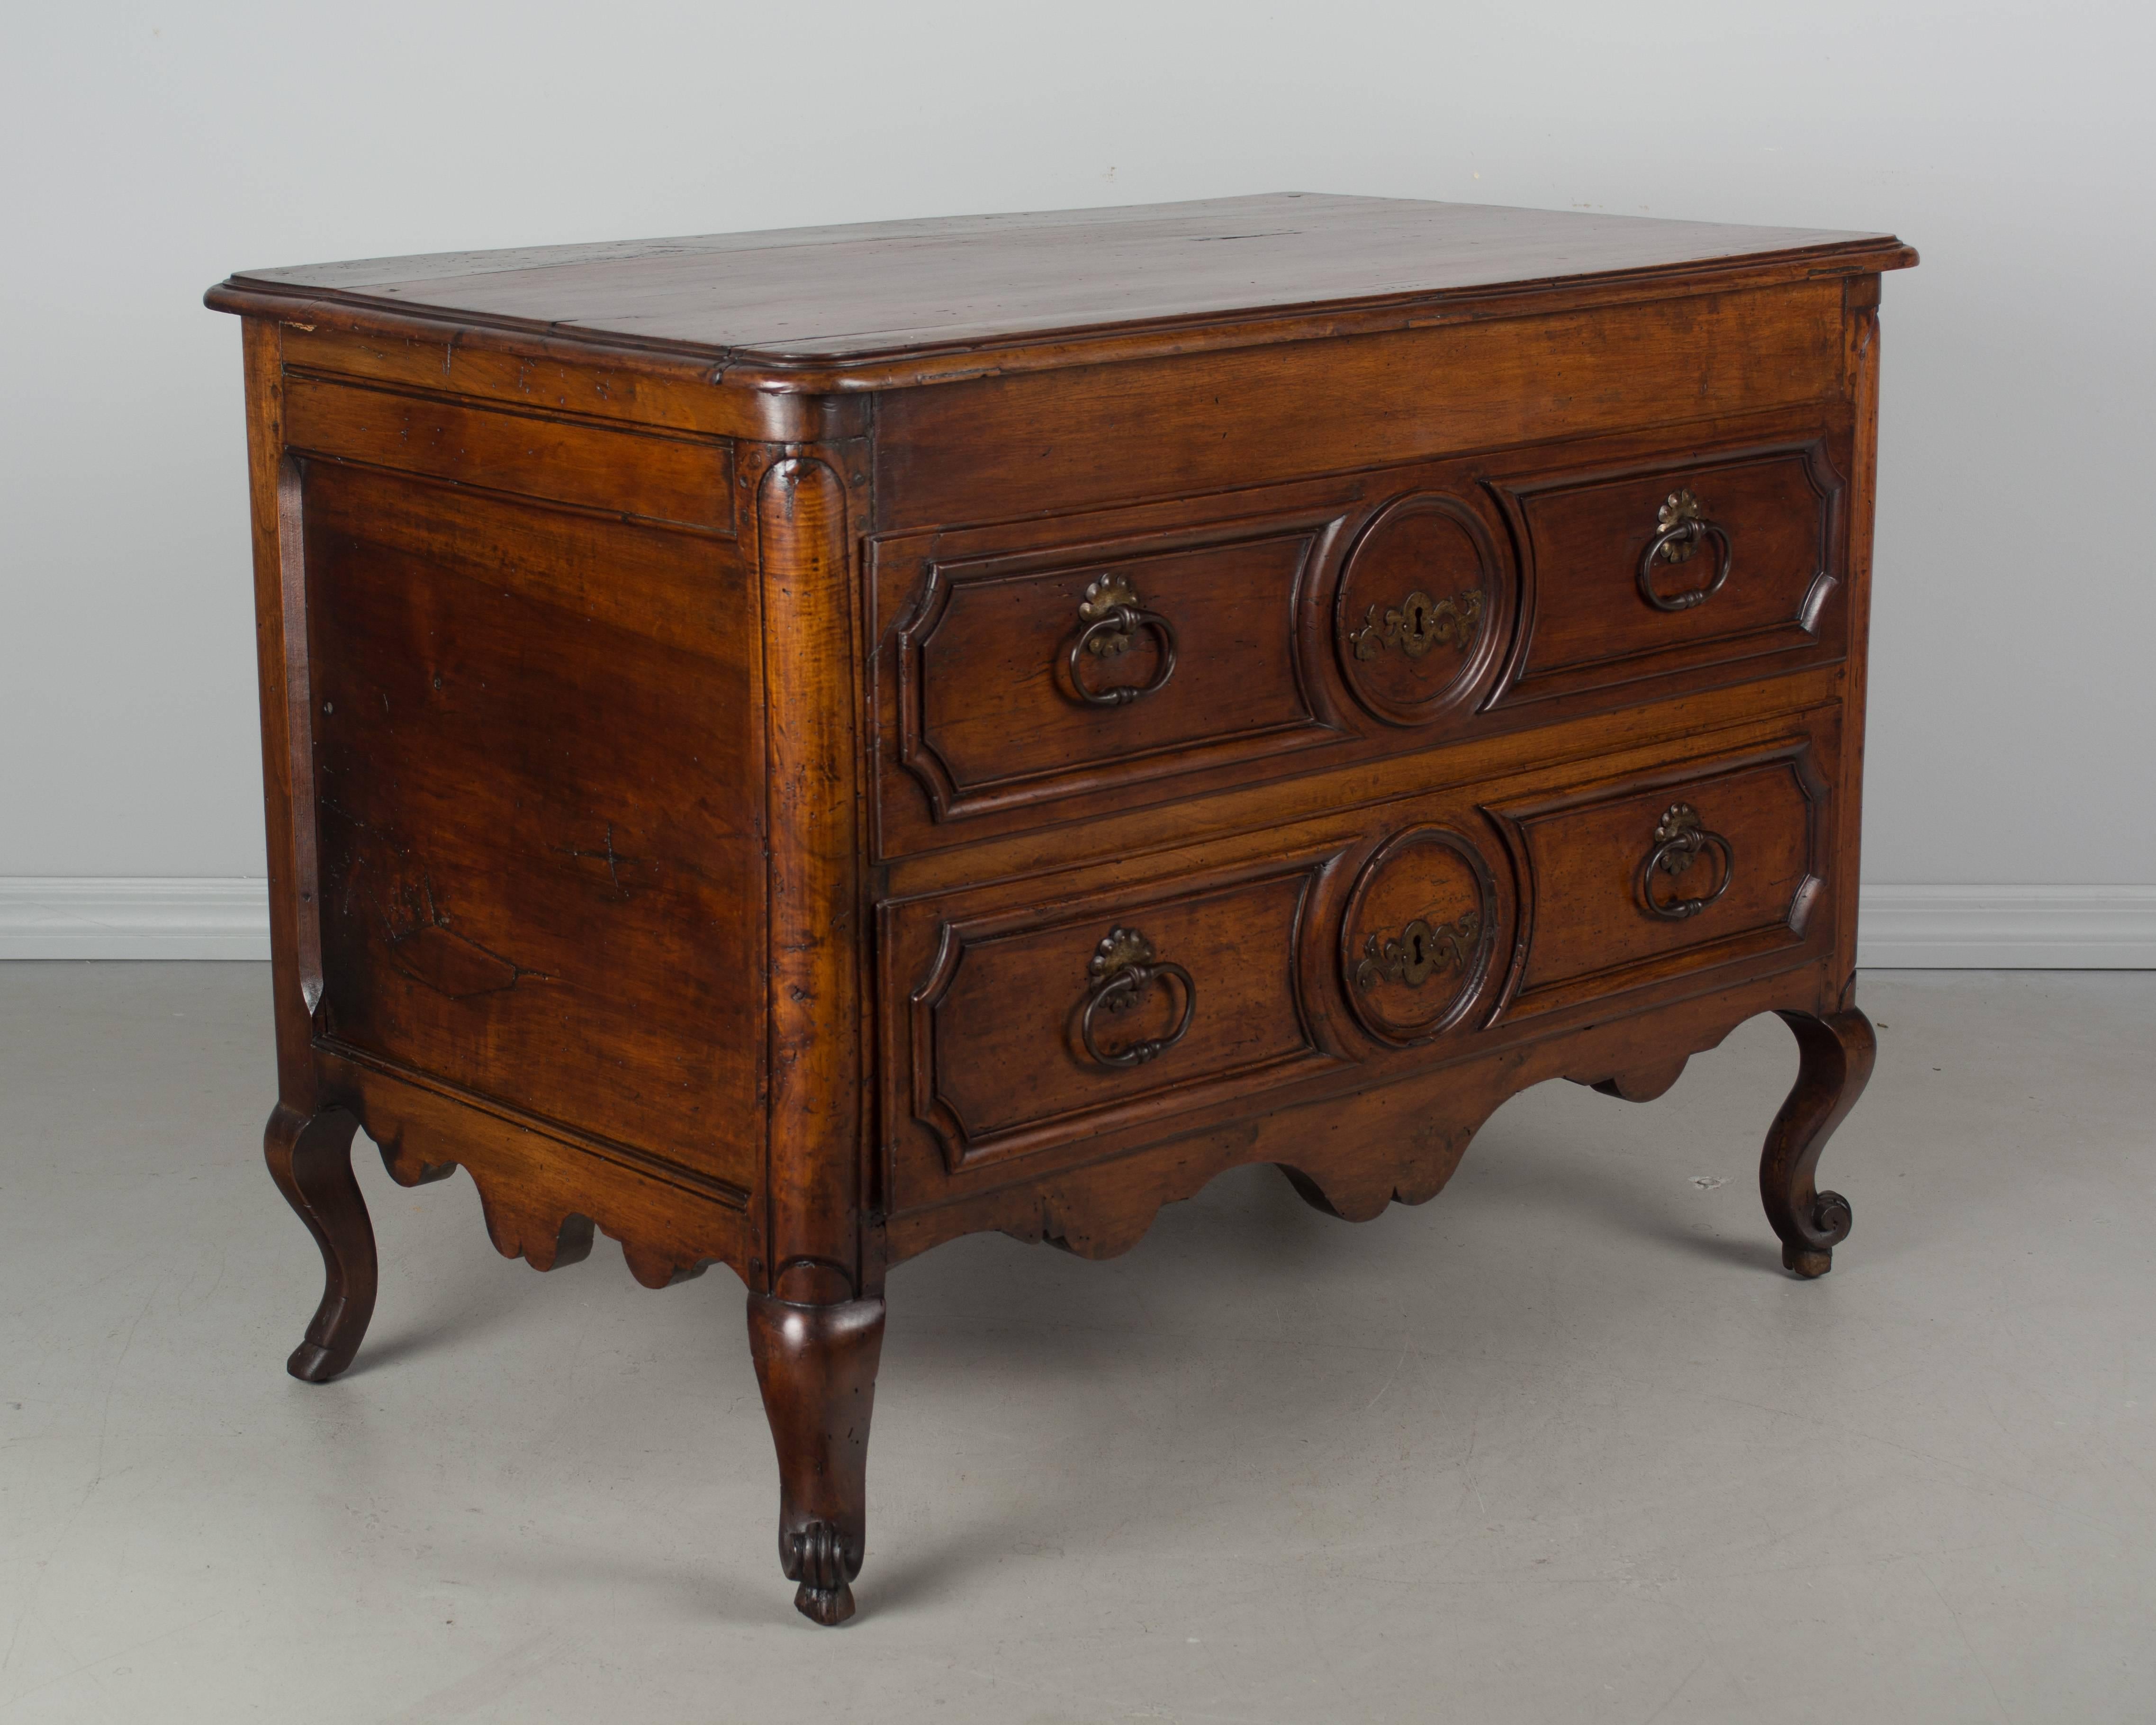 A Louis XV style French commode, or chest of drawers, made of solid hand-carved walnut and finished on all four sides. Beautiful quality to the wood with a waxed patina. This chest was converted from a blanket chest in the 19th century. Two